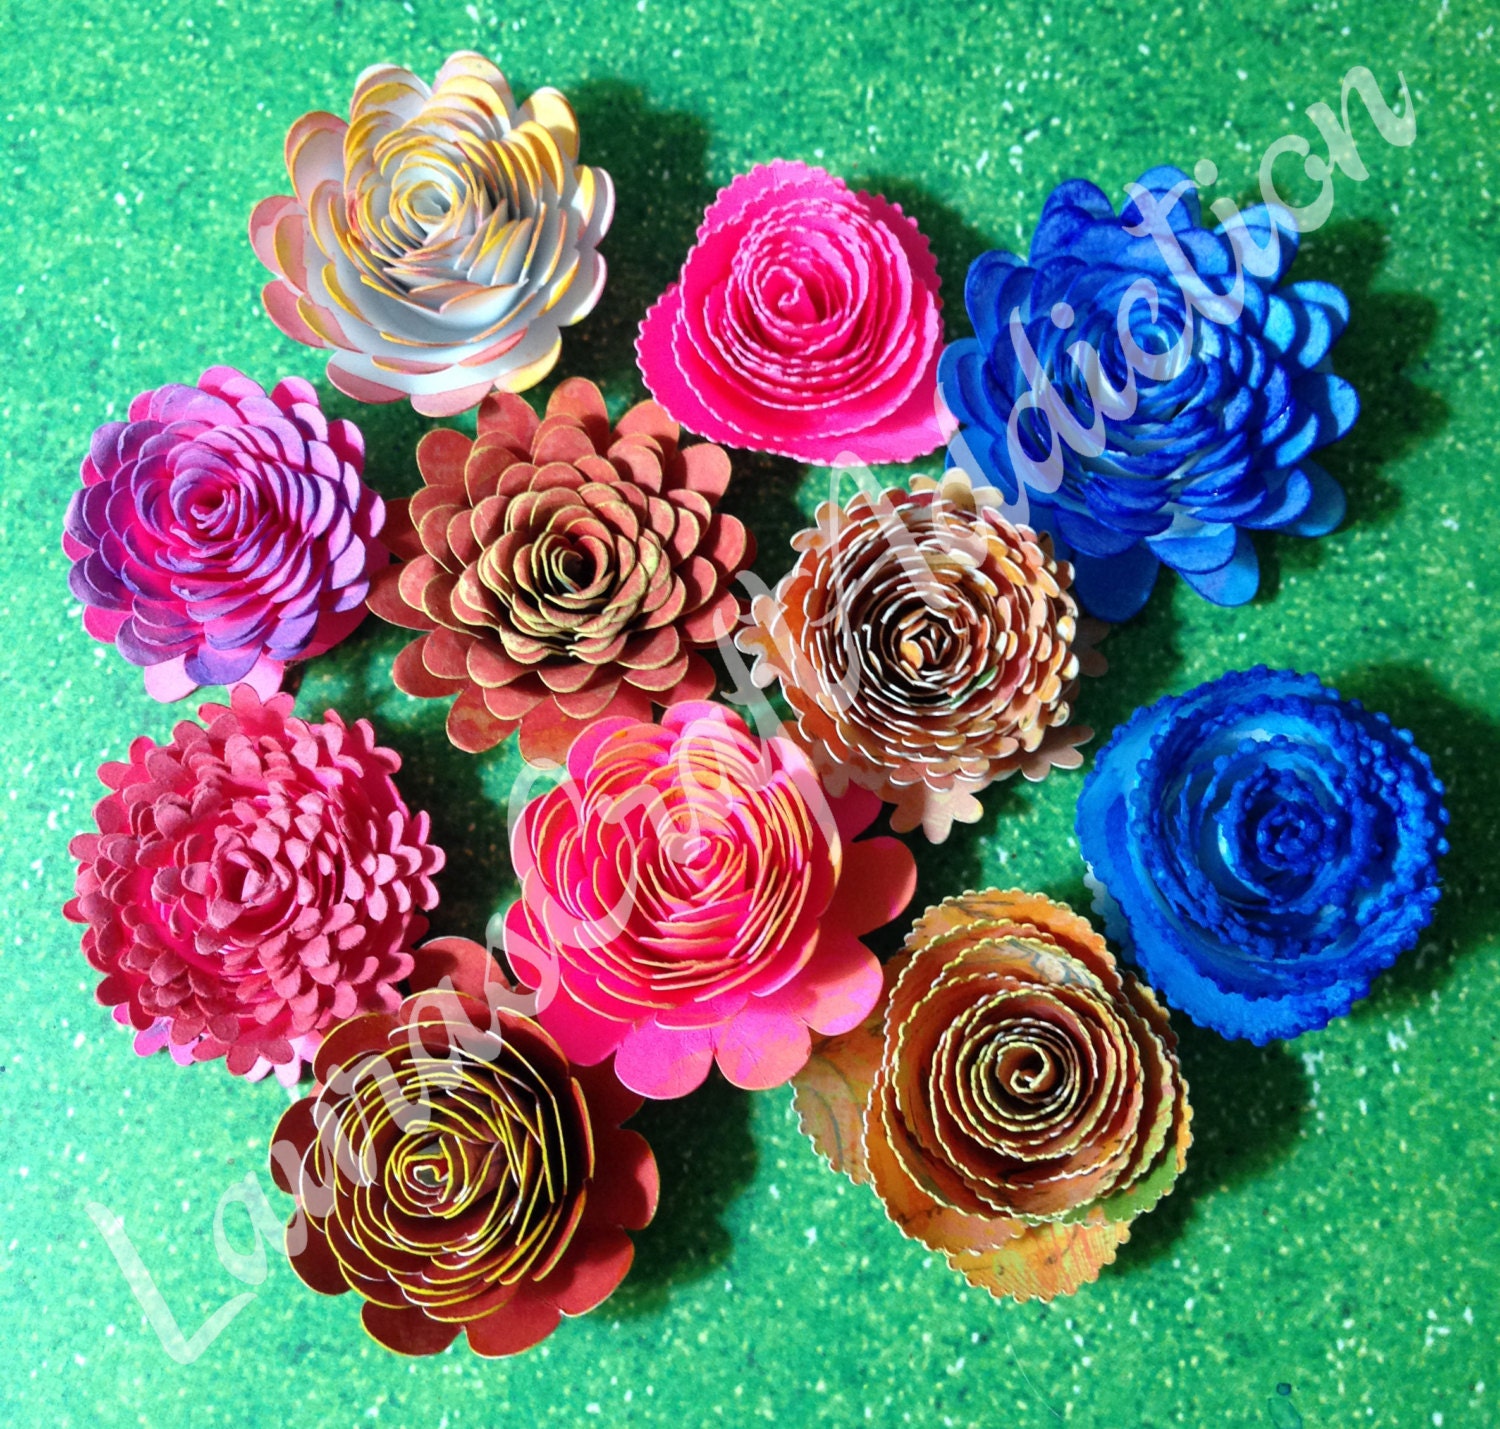 Download Paper Flowers cut file 16 Designs Bouquet of Rolled Roses